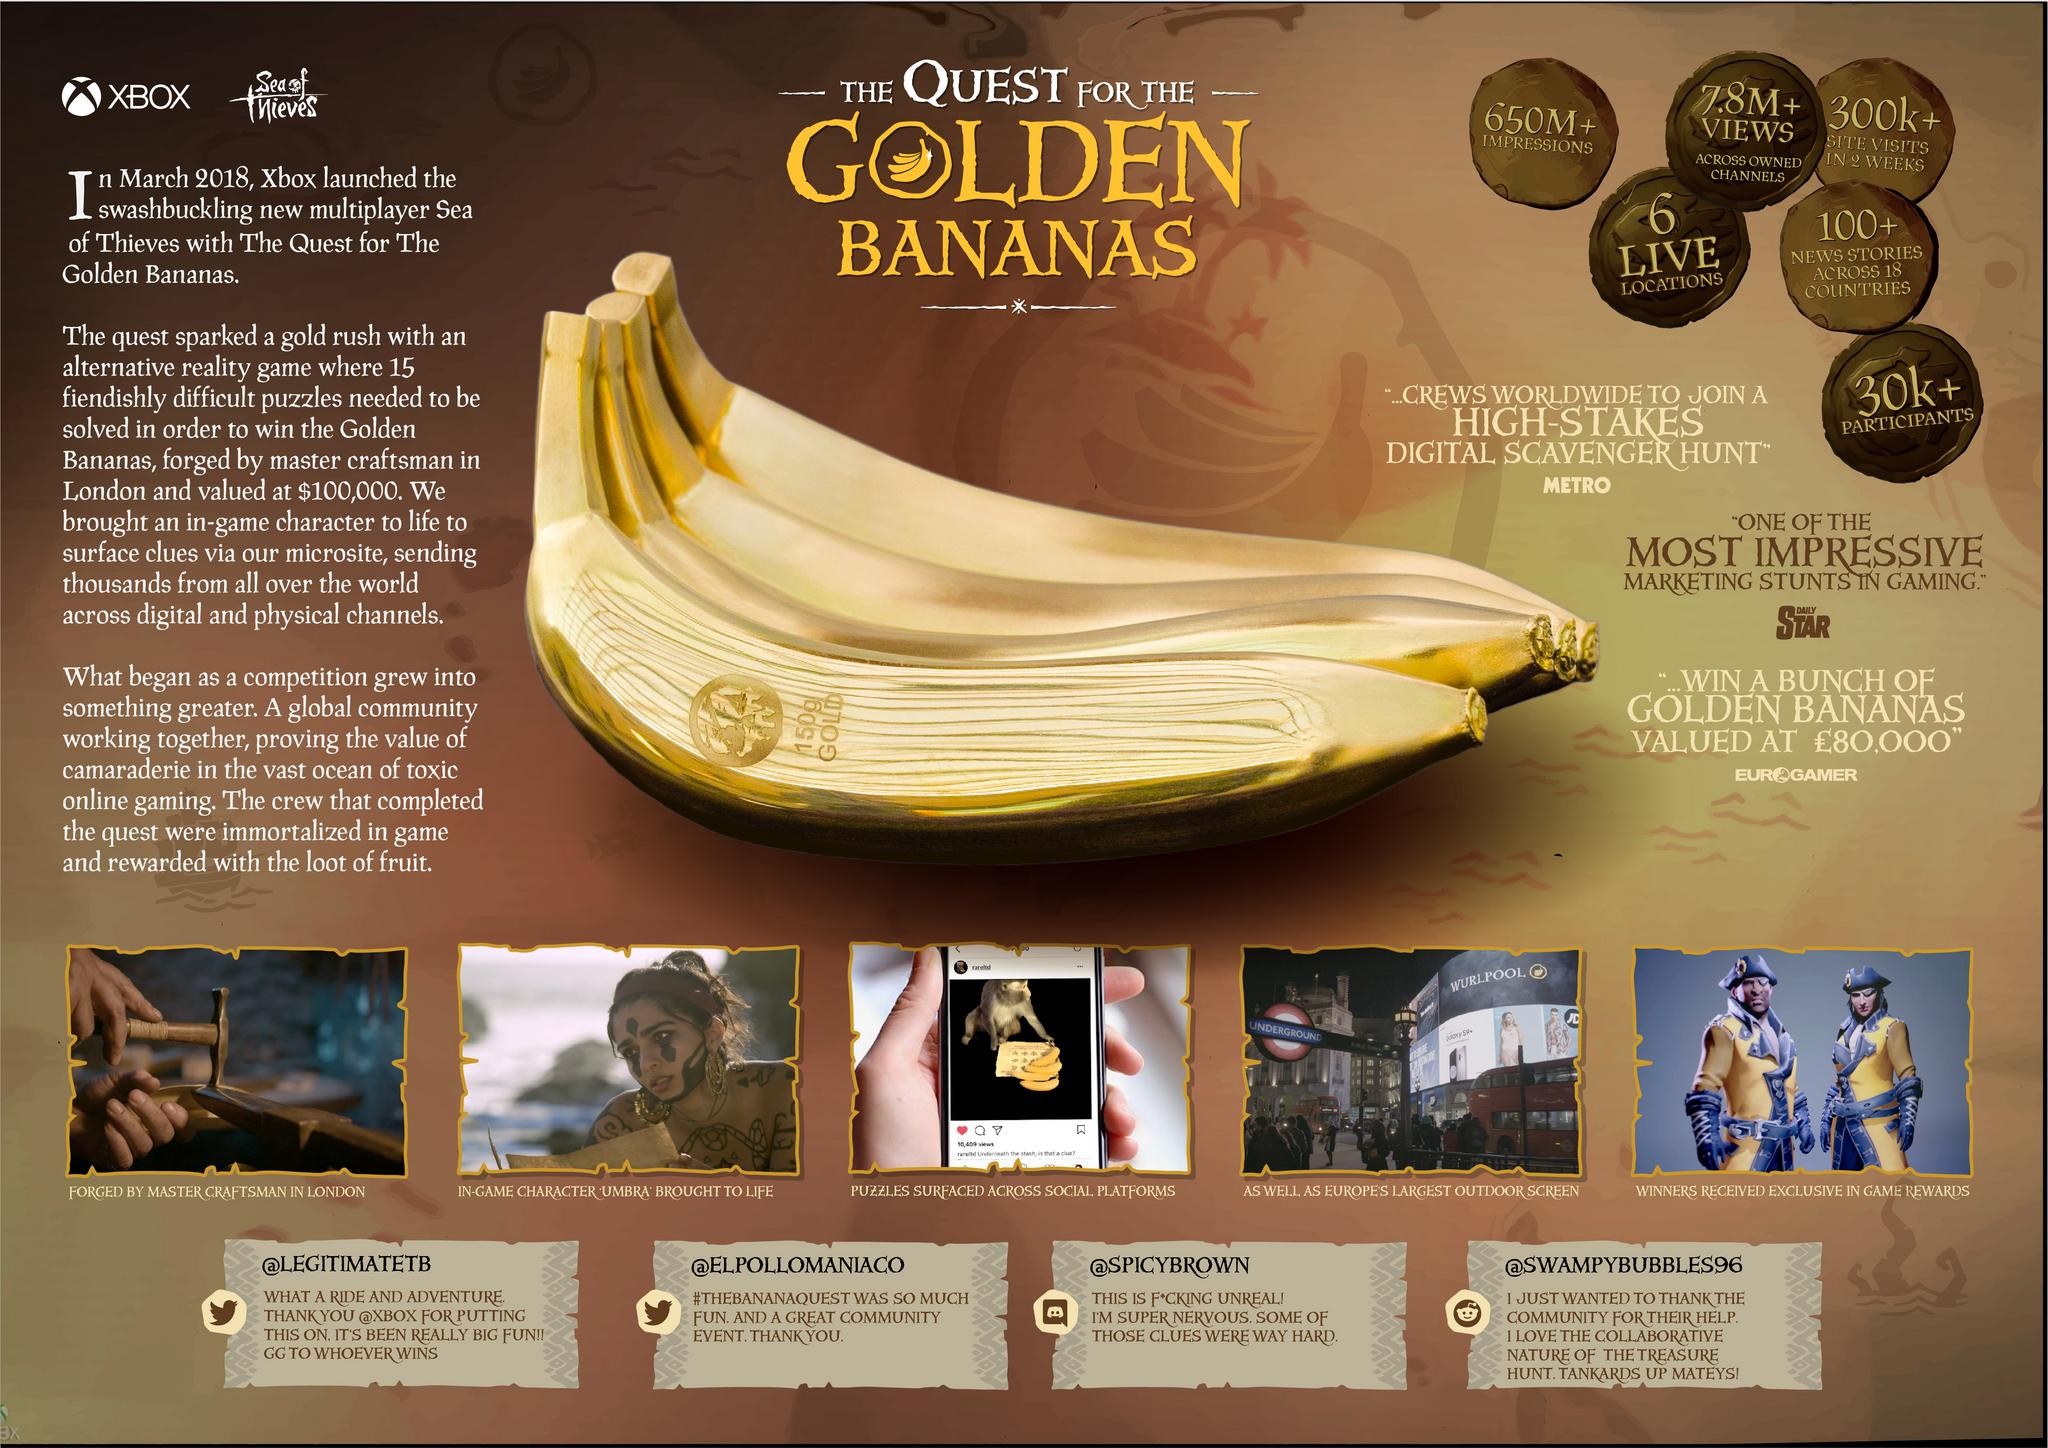 The Quest for The Golden Bananas